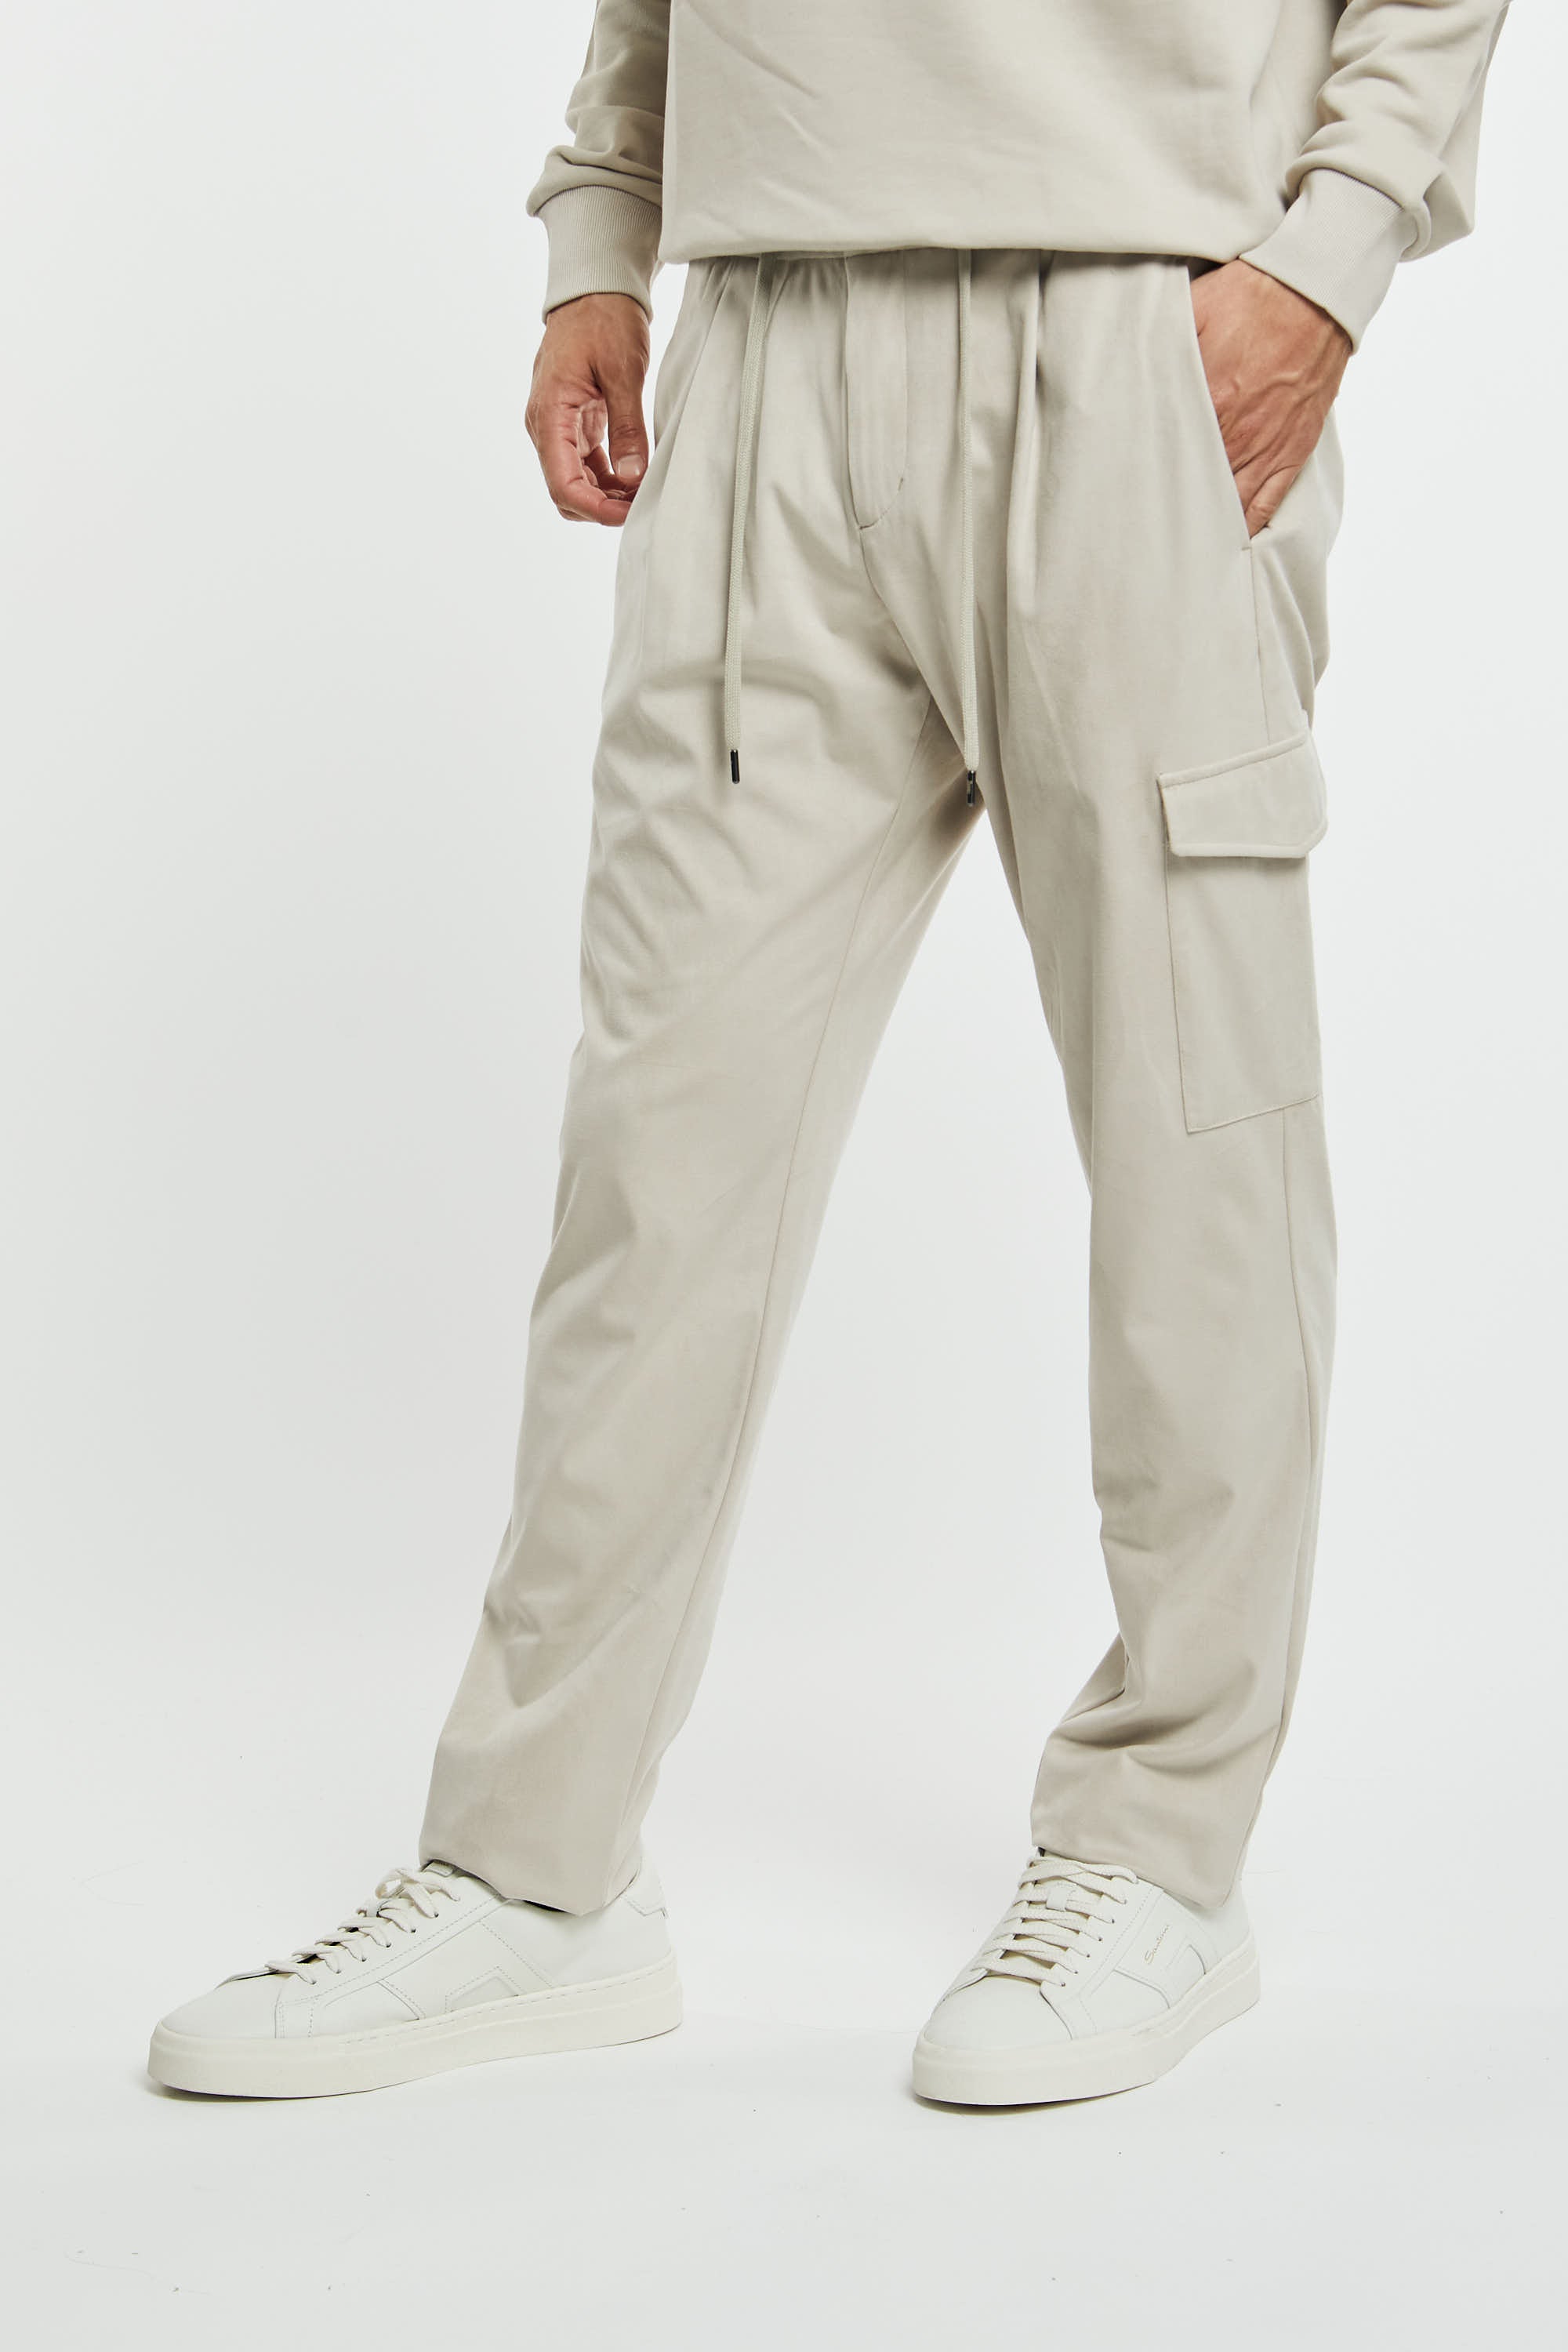 Herno Resort Trousers in Suede Microfiber Ice - 5